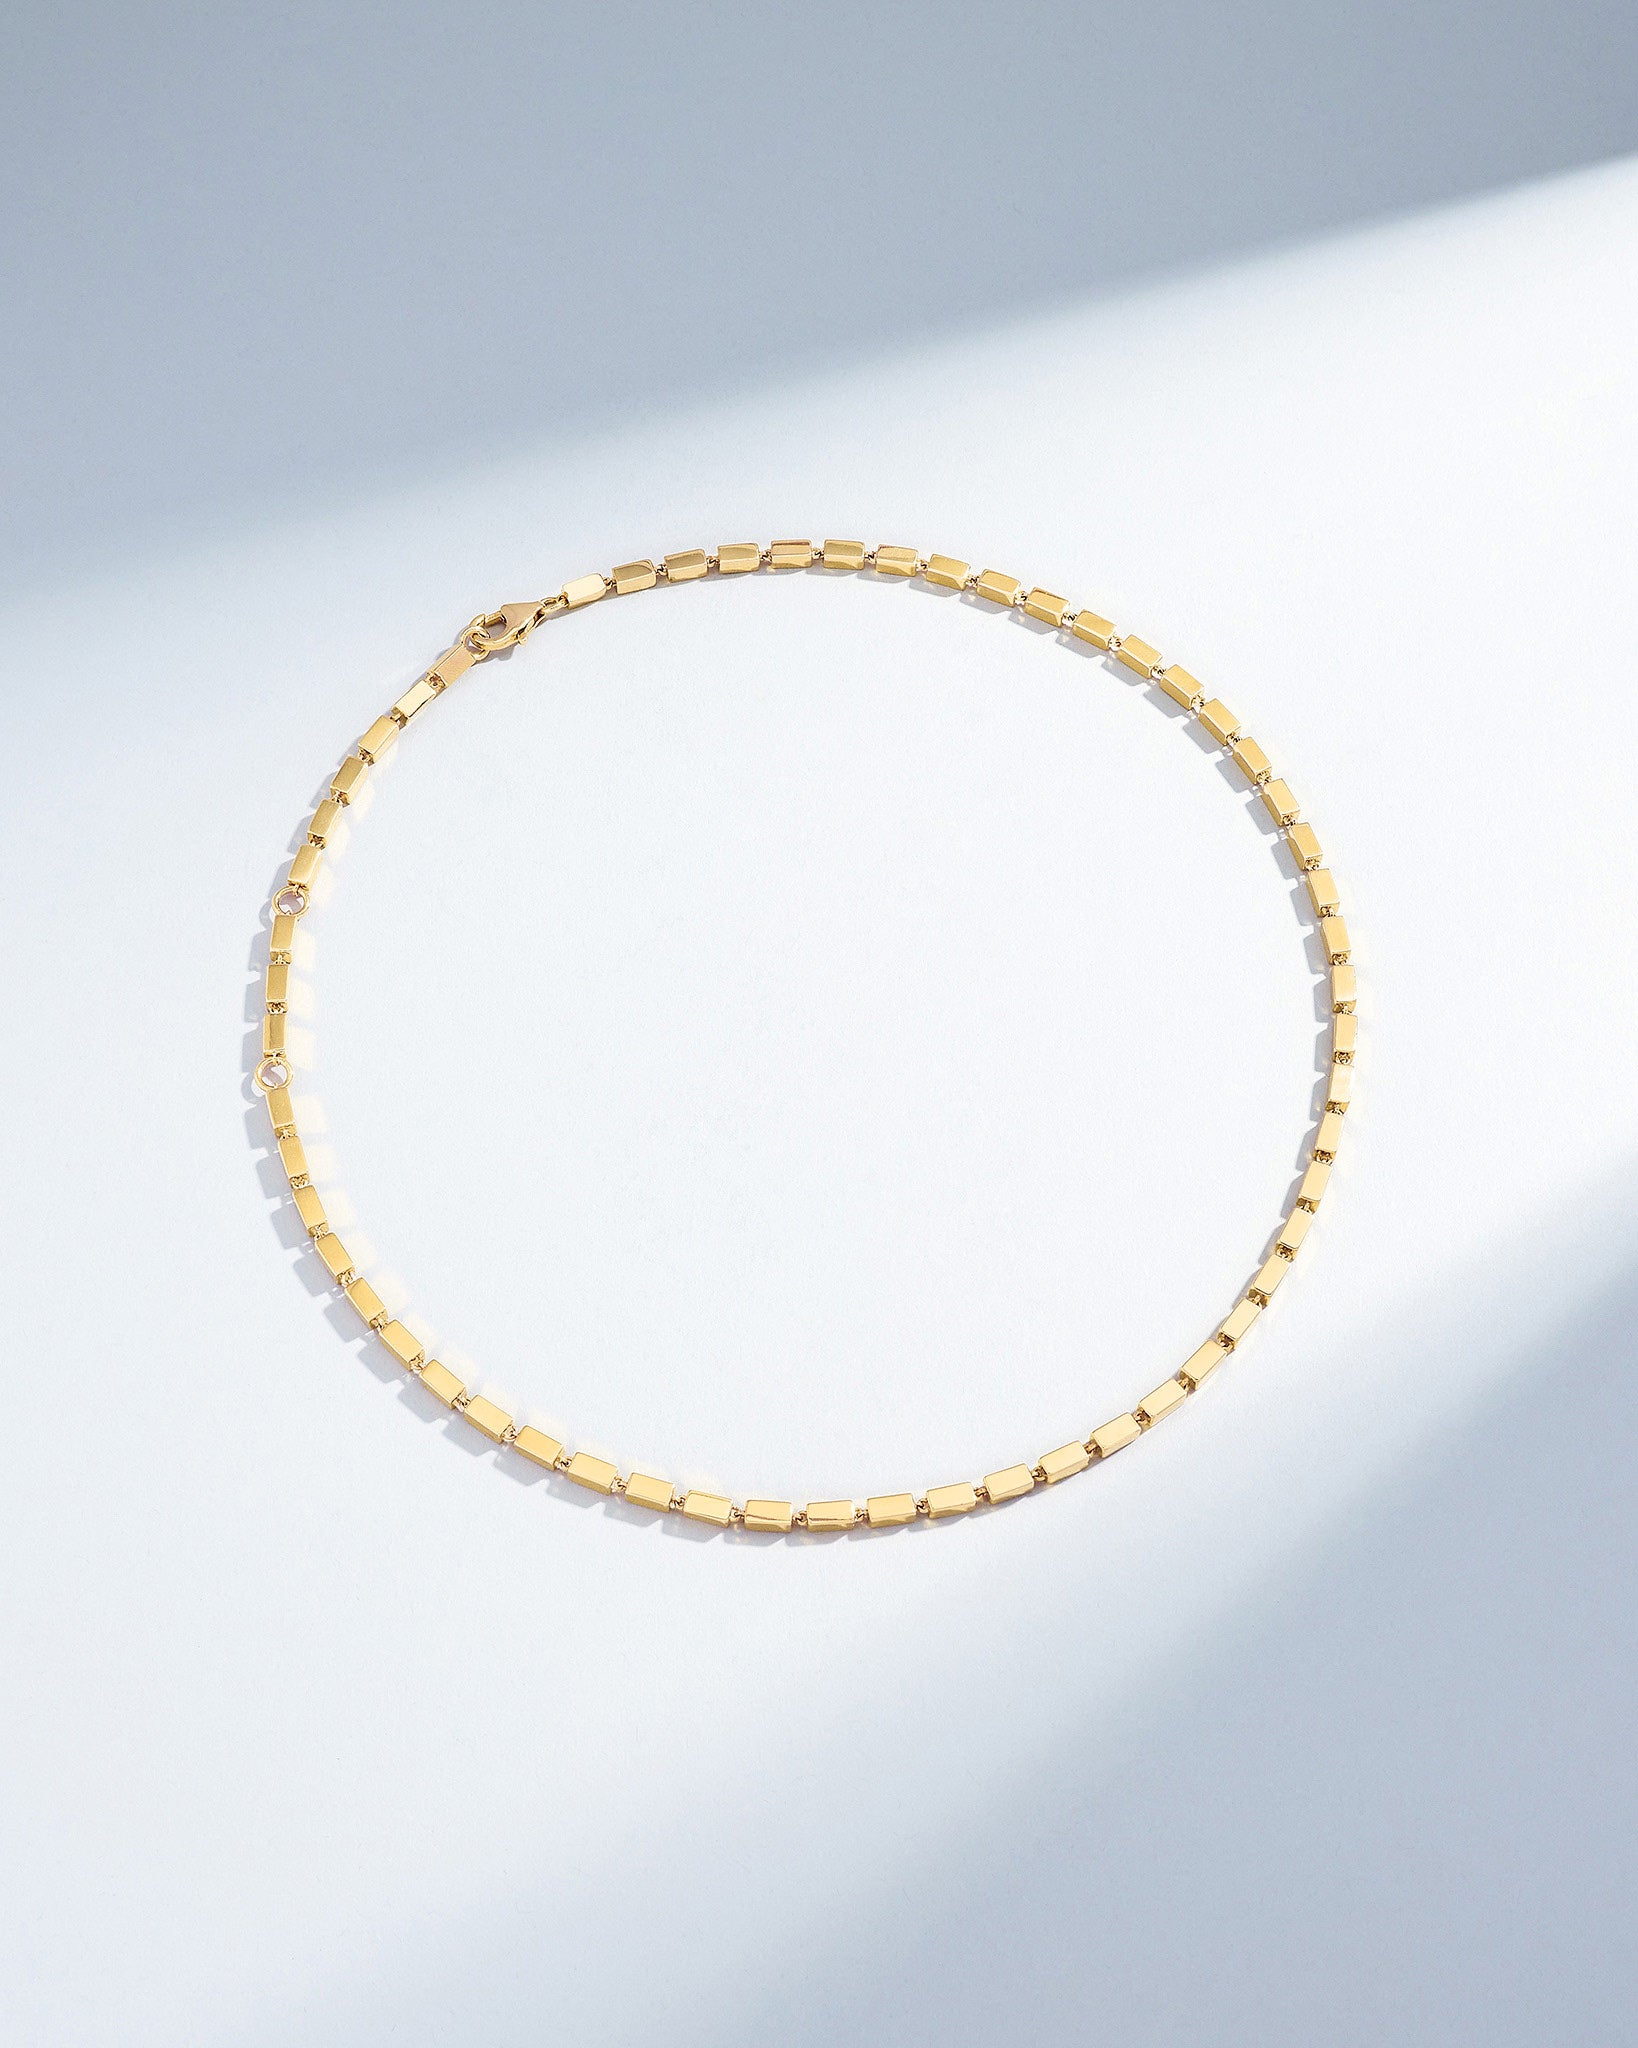 Suzanne Kalan Block-Chain Thick Necklace in 18k yellow gold